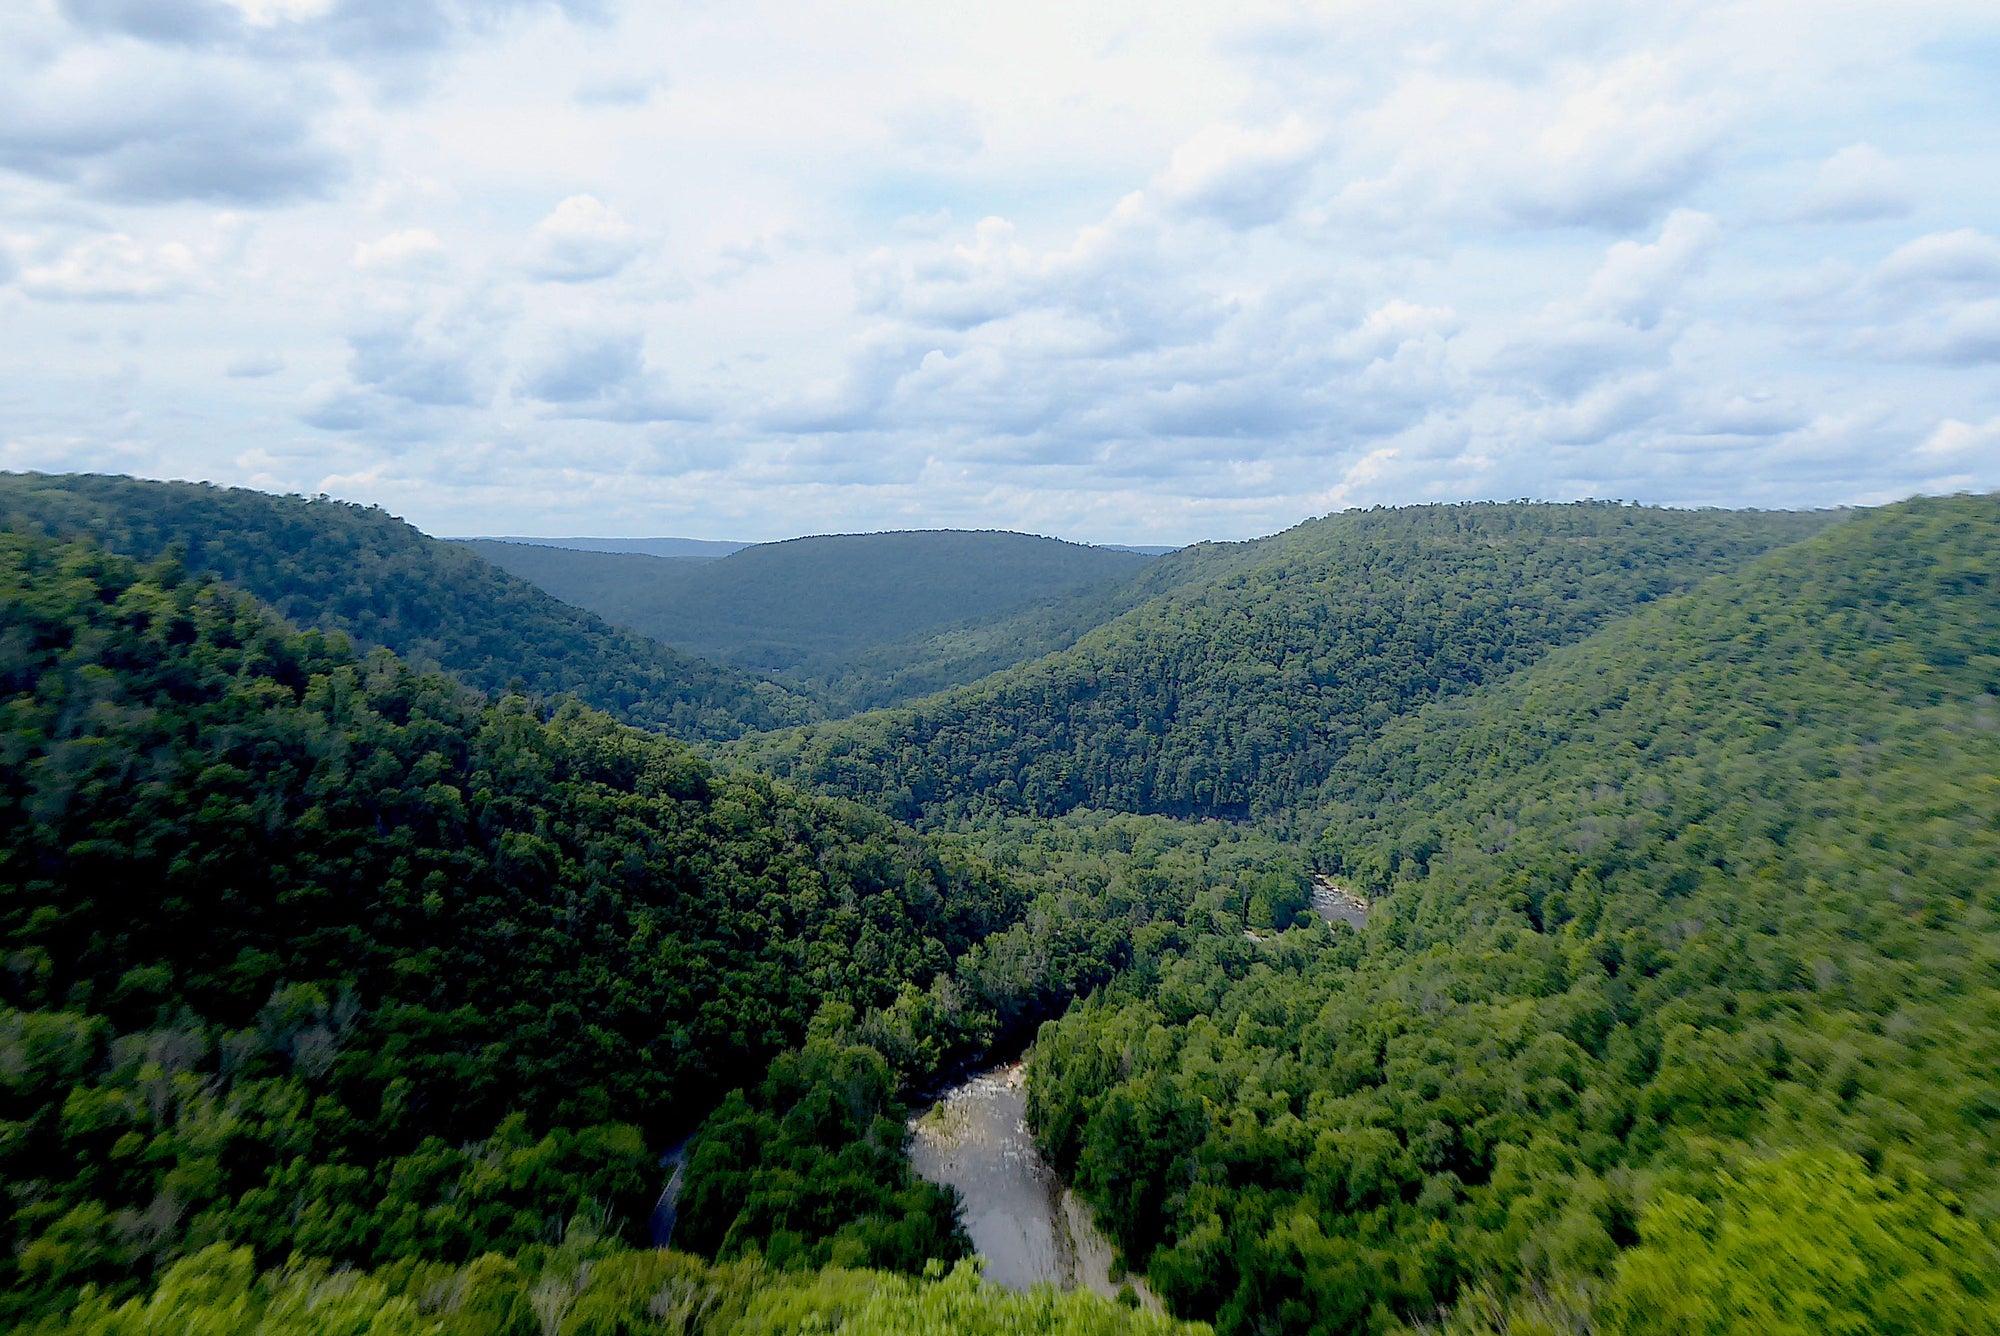 Explore Loyalsock State Forest in the PA Wilds